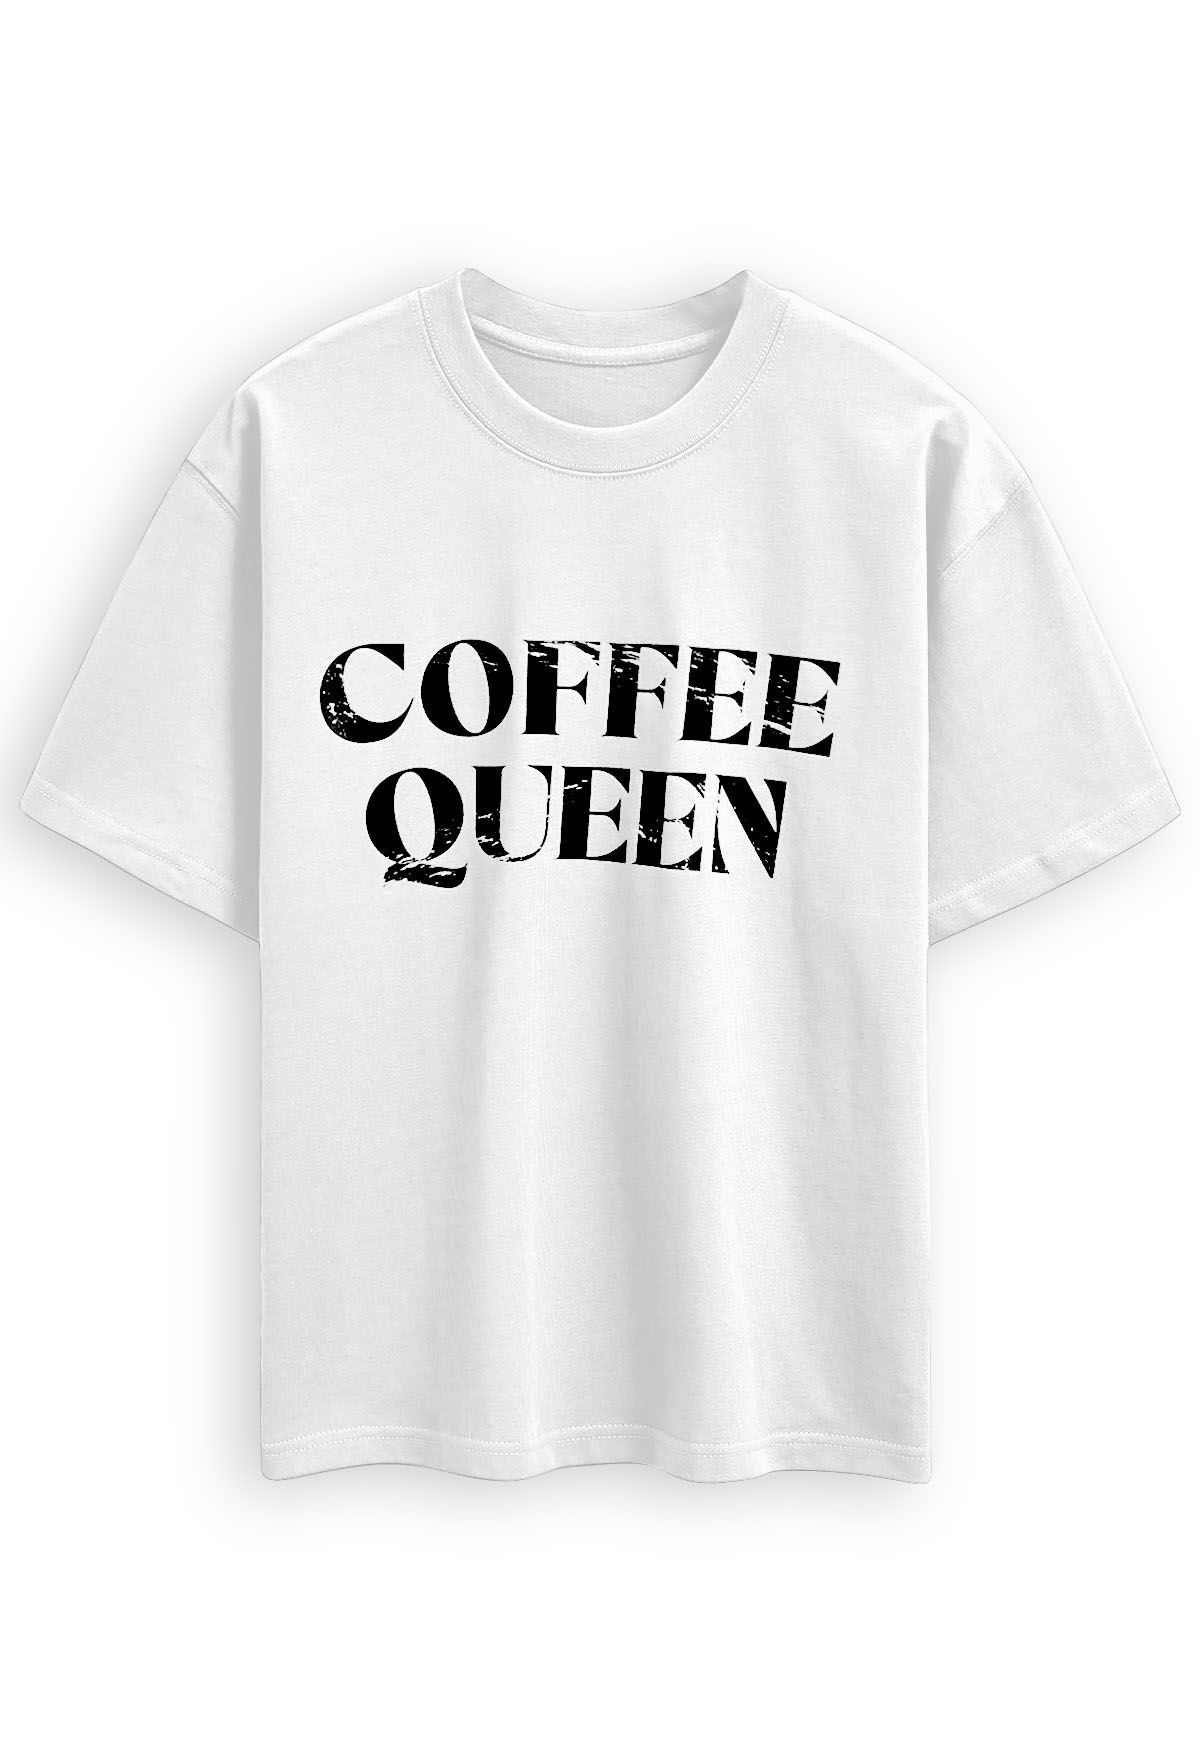 Coffee Queen Printed Cotton T-Shirt in White